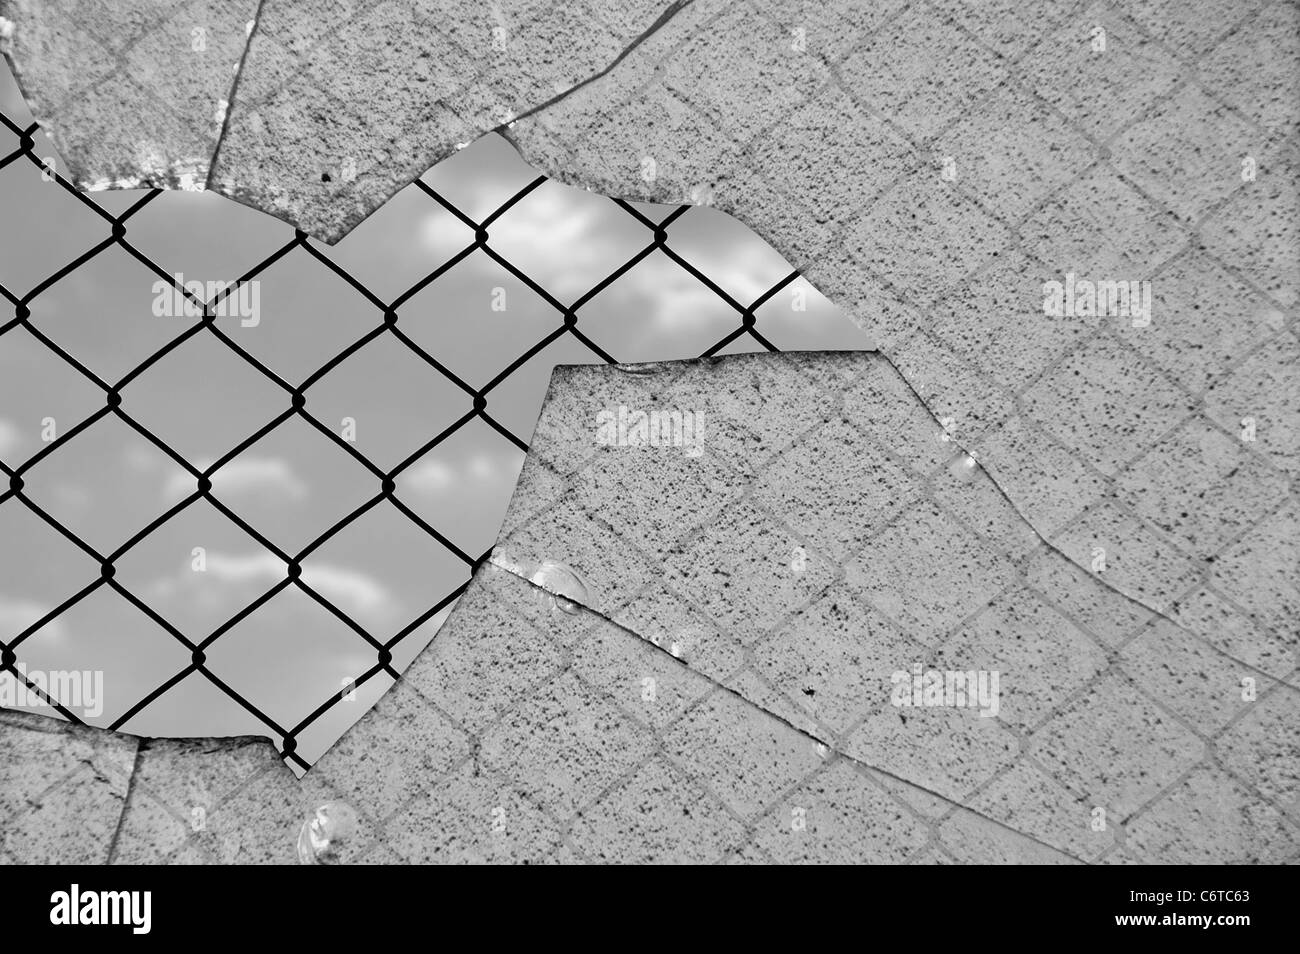 Broken glass and chain link wired fence against the sky. Black and white. Stock Photo